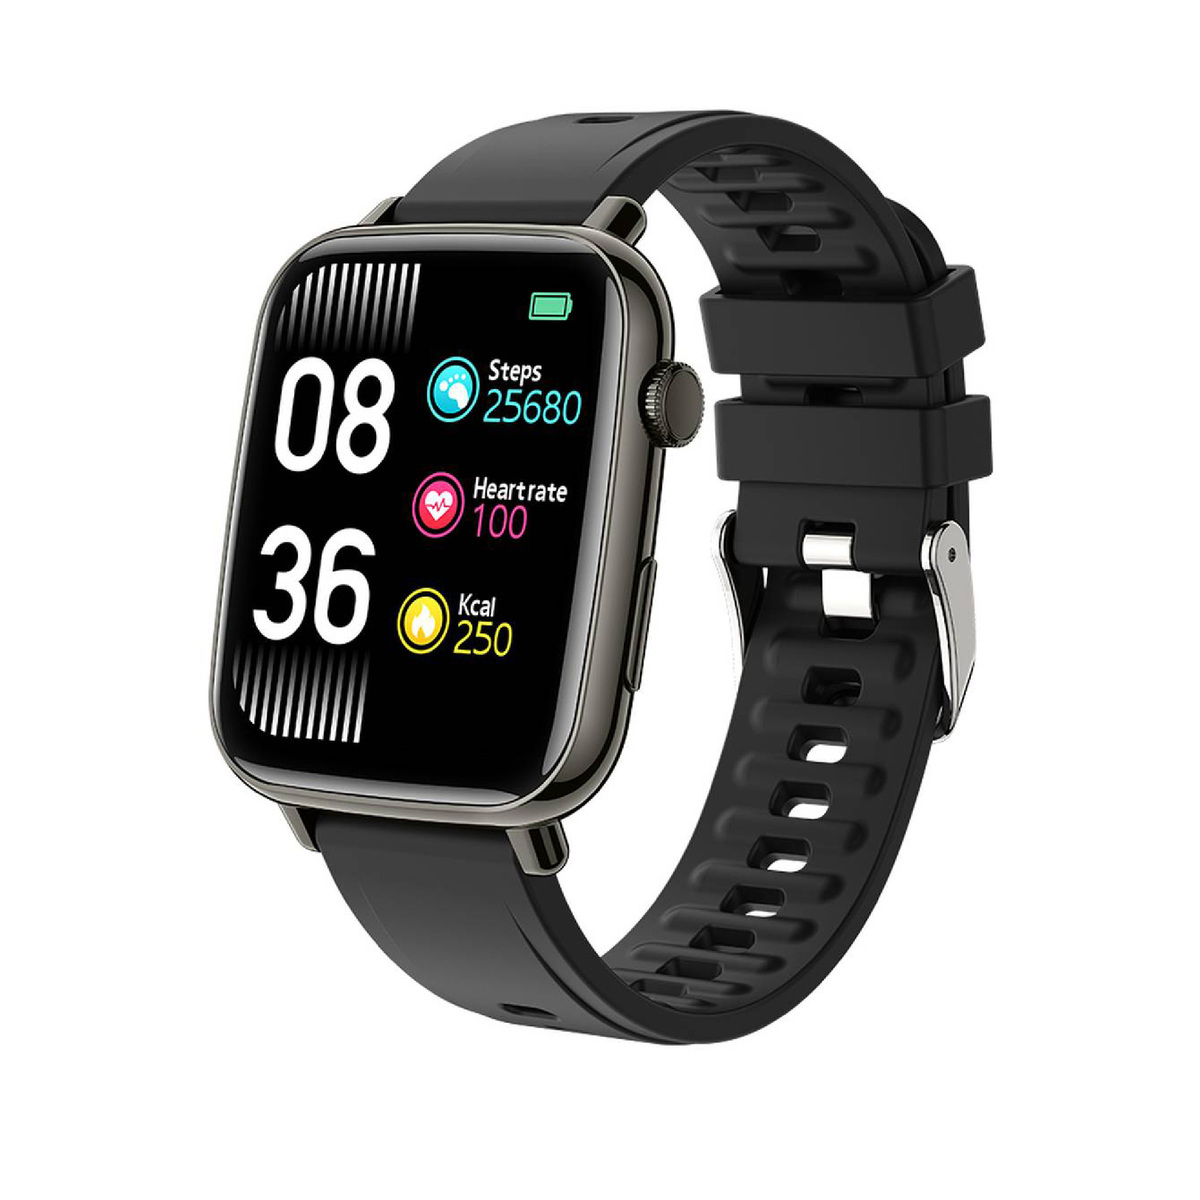 Porodo Verge Smart Watch Fitness & Health Tracking with Calls,Socials Notifications, 1.69" HD Touch Screen, Multi-Sport Modes, Sleep & Heart Rate Monitoring, IP67 Waterproof Features, 7-Days Working Time Compatible for iOS,Android App - Black